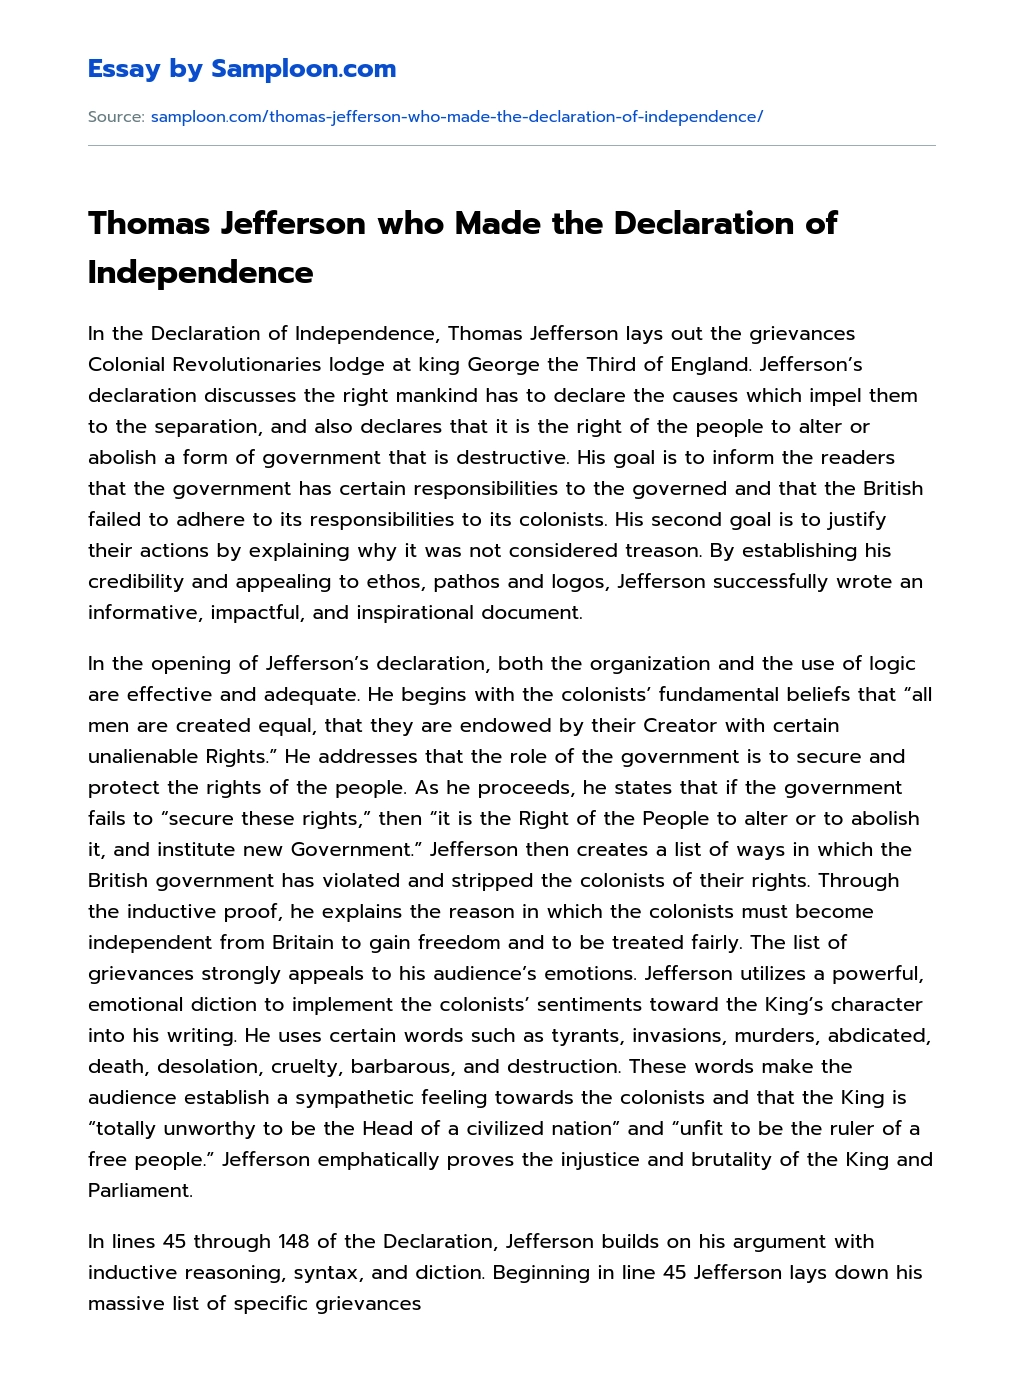 Thomas Jefferson who Made the Declaration of Independence essay